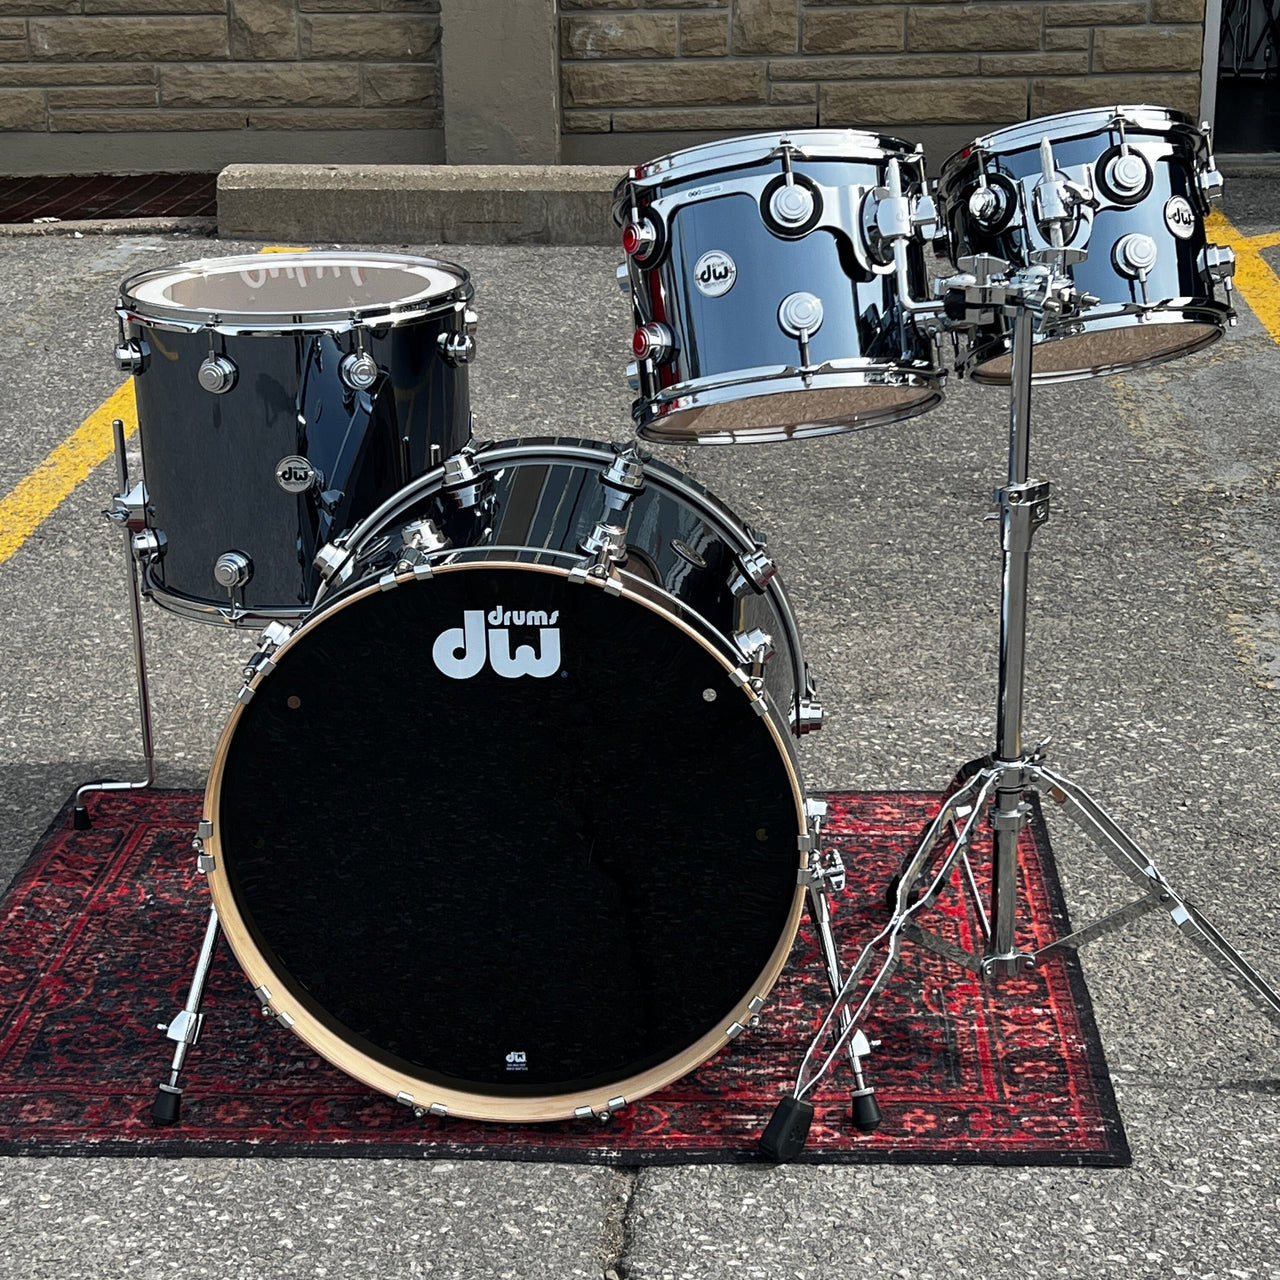 DW Collectors "333" Shell in Chrome Shadow drum kit DW 